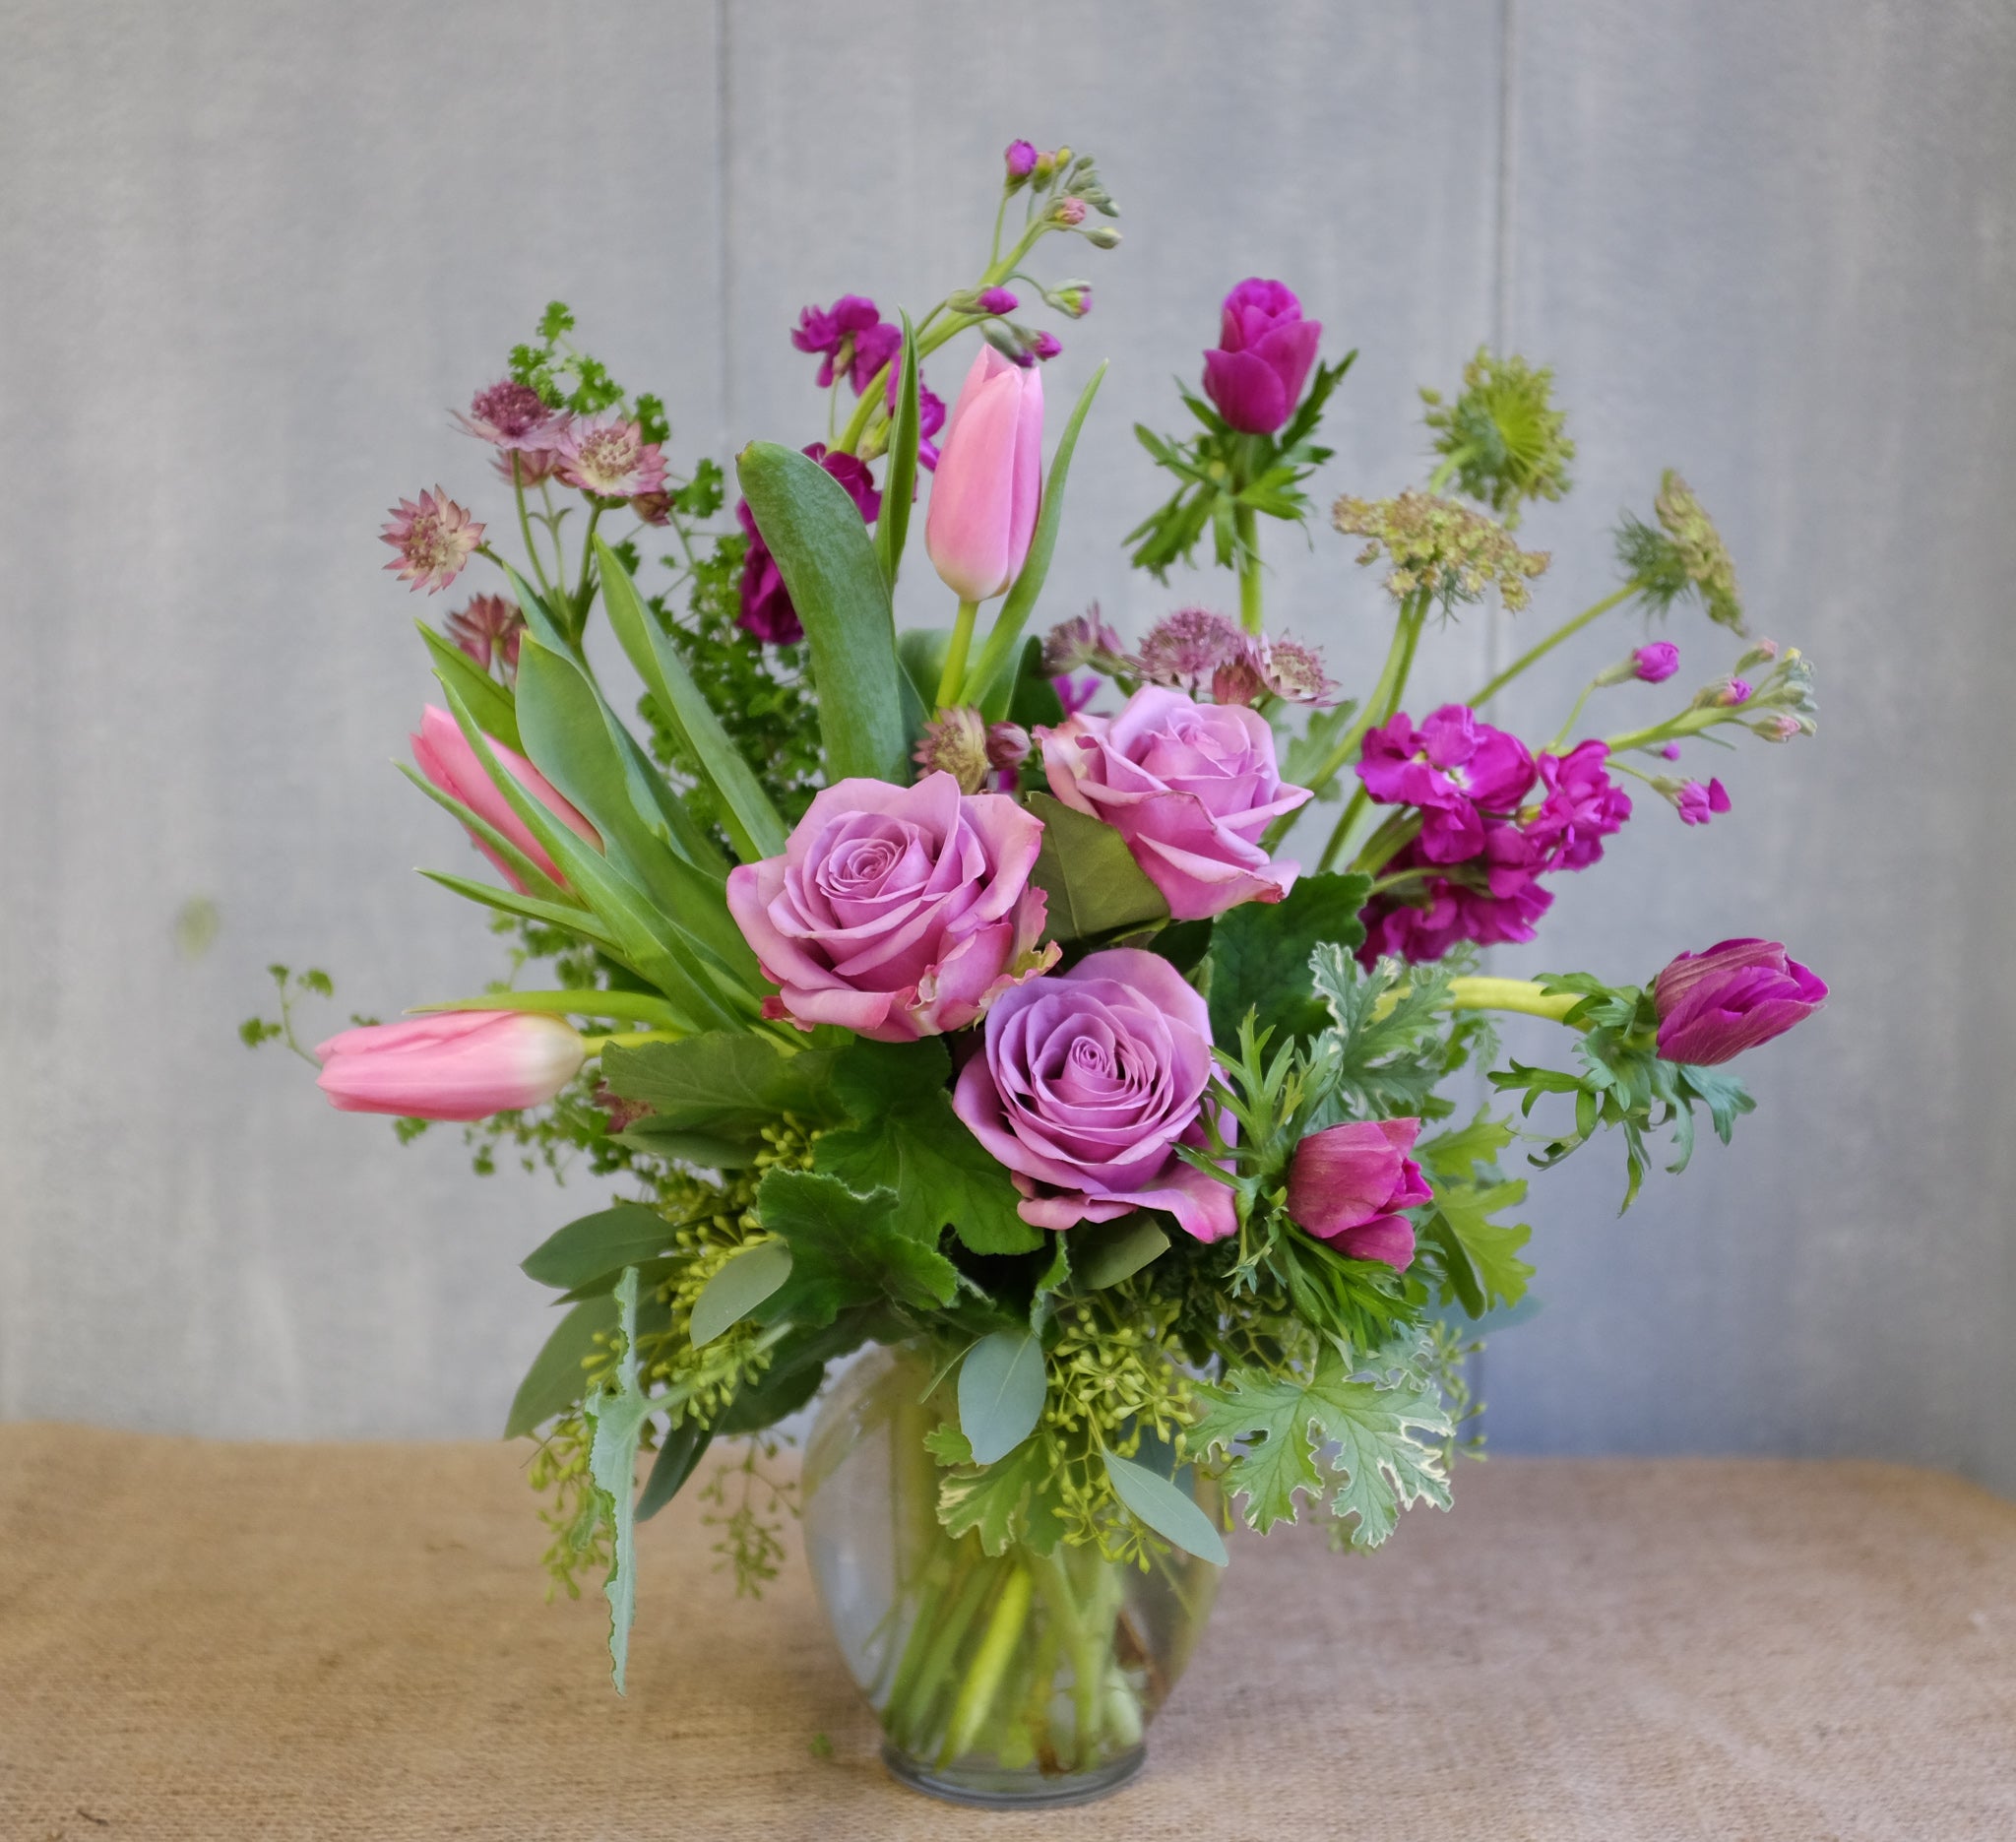 Flower bouquet with lavender roses, pink tulips, fuchsia anemones by Michler's Florist